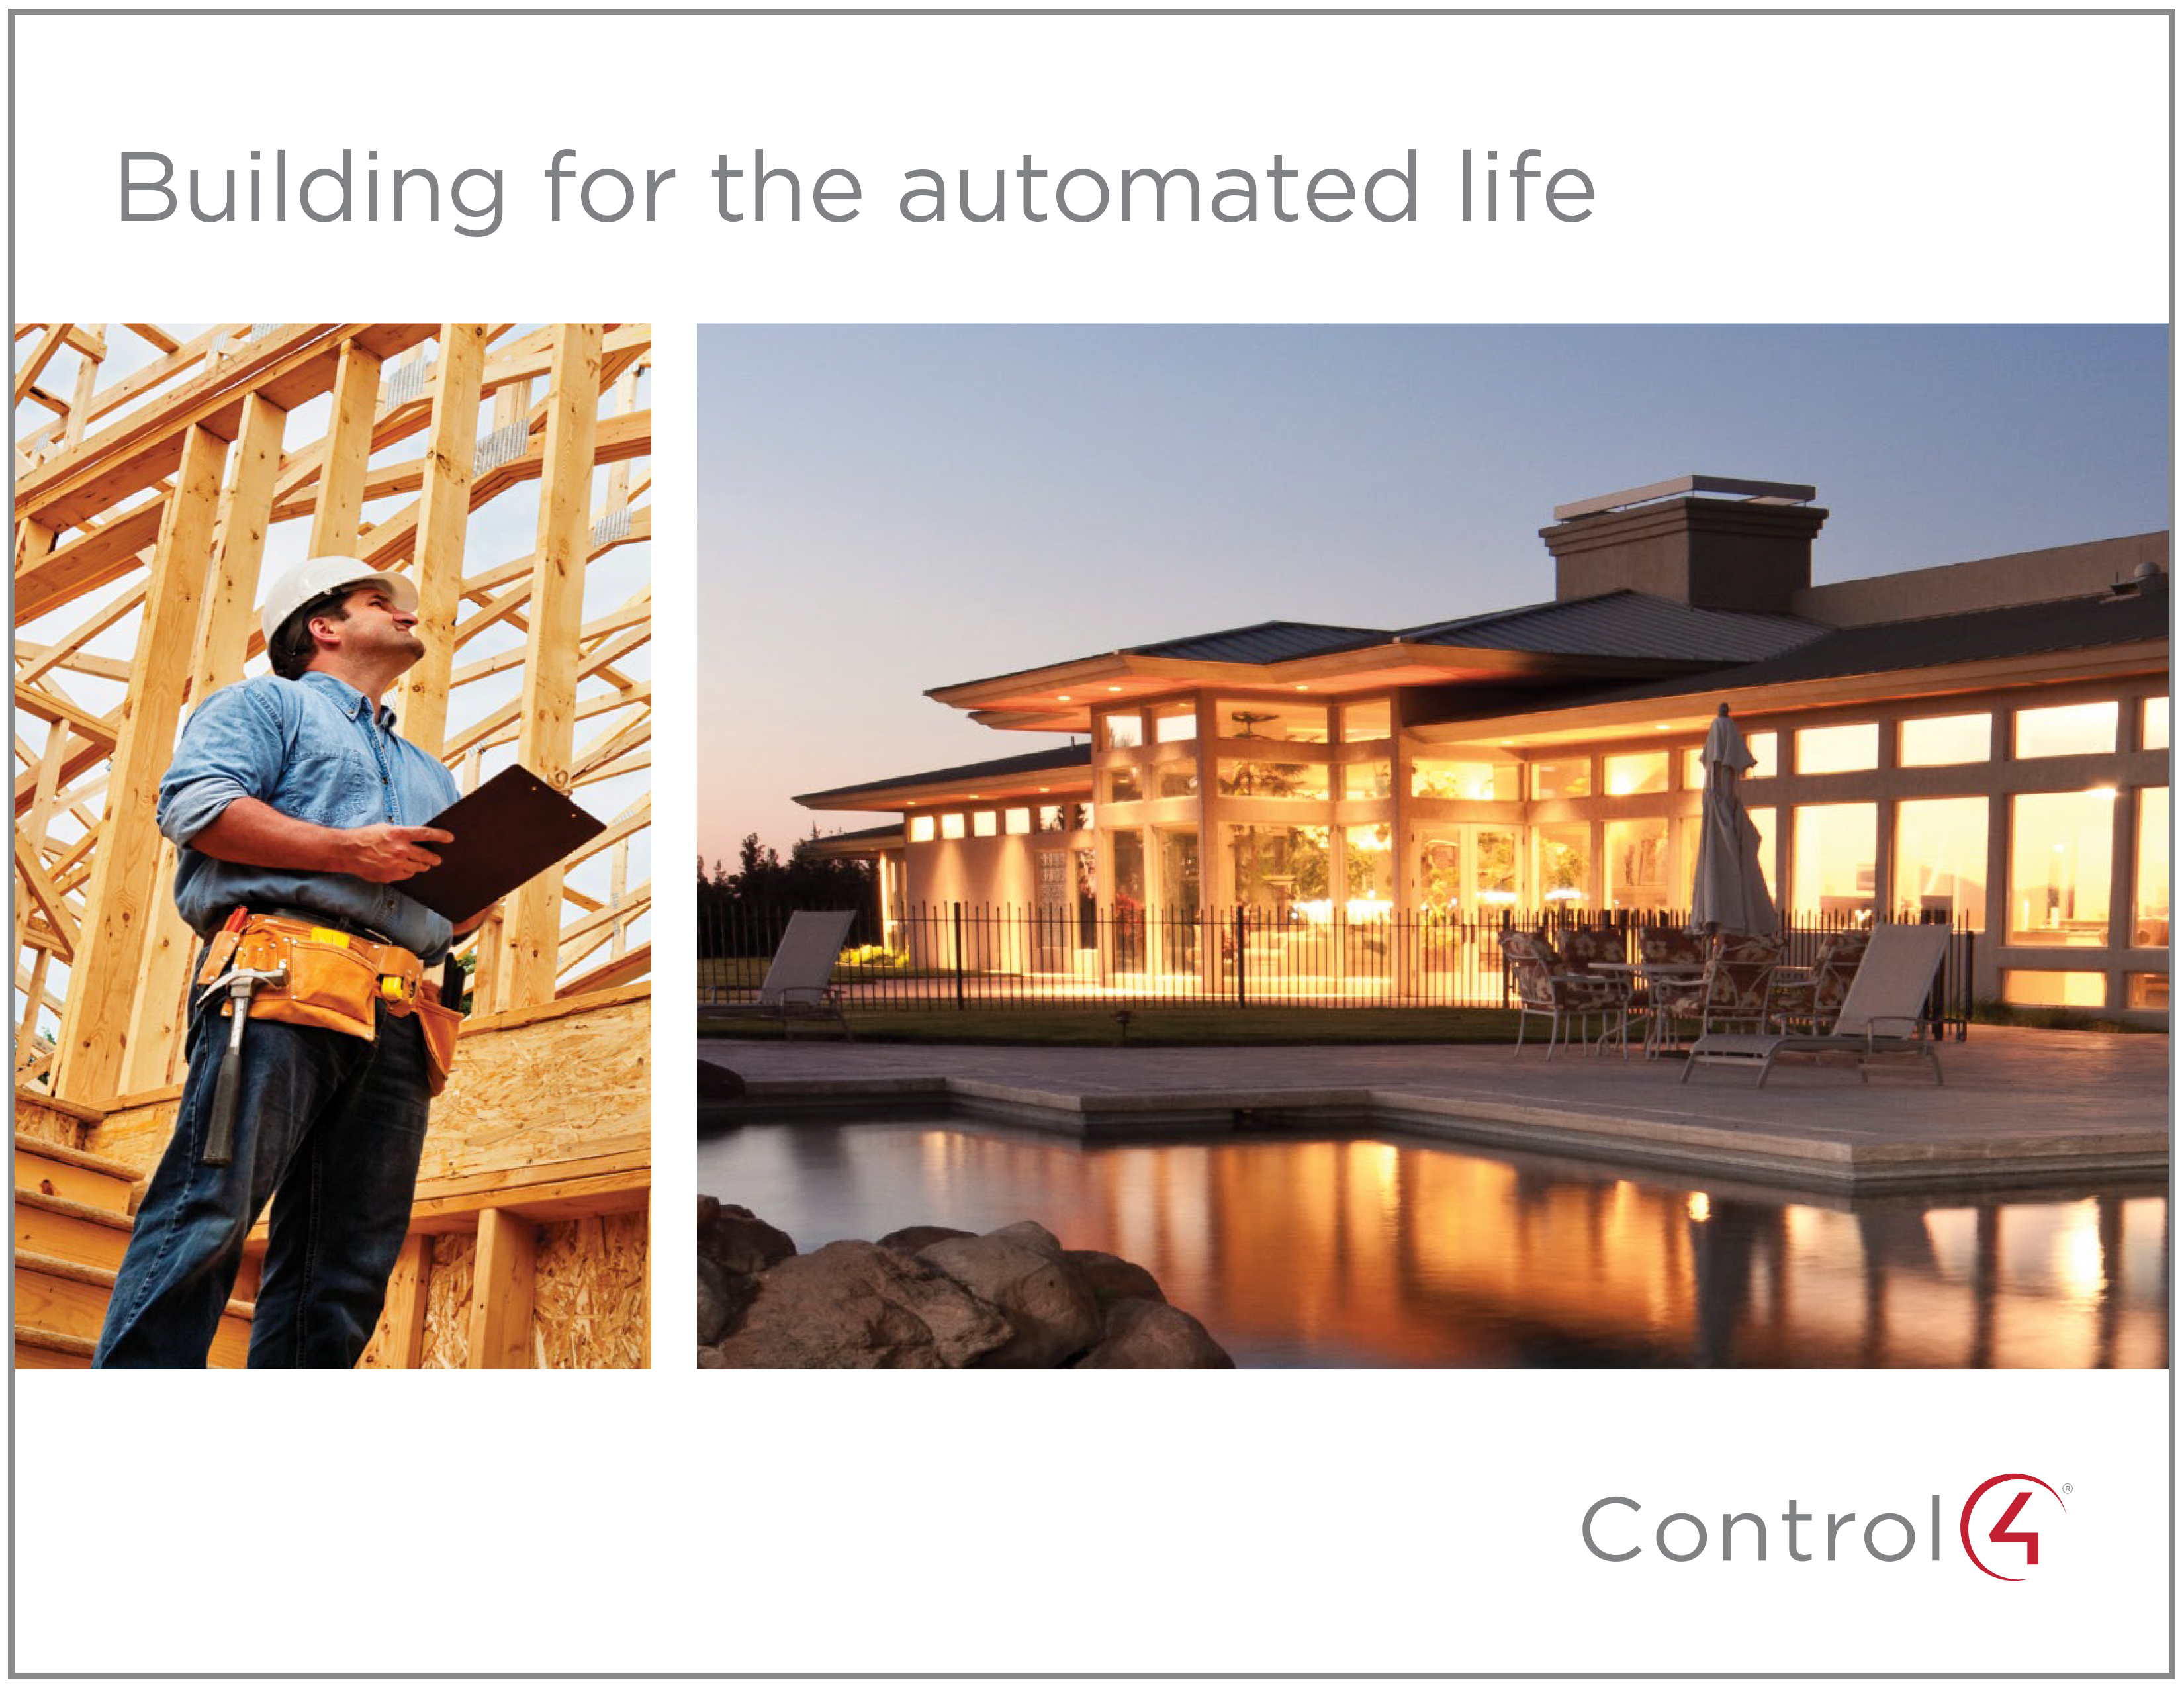 Control4 Building For The Automated Life Brochure